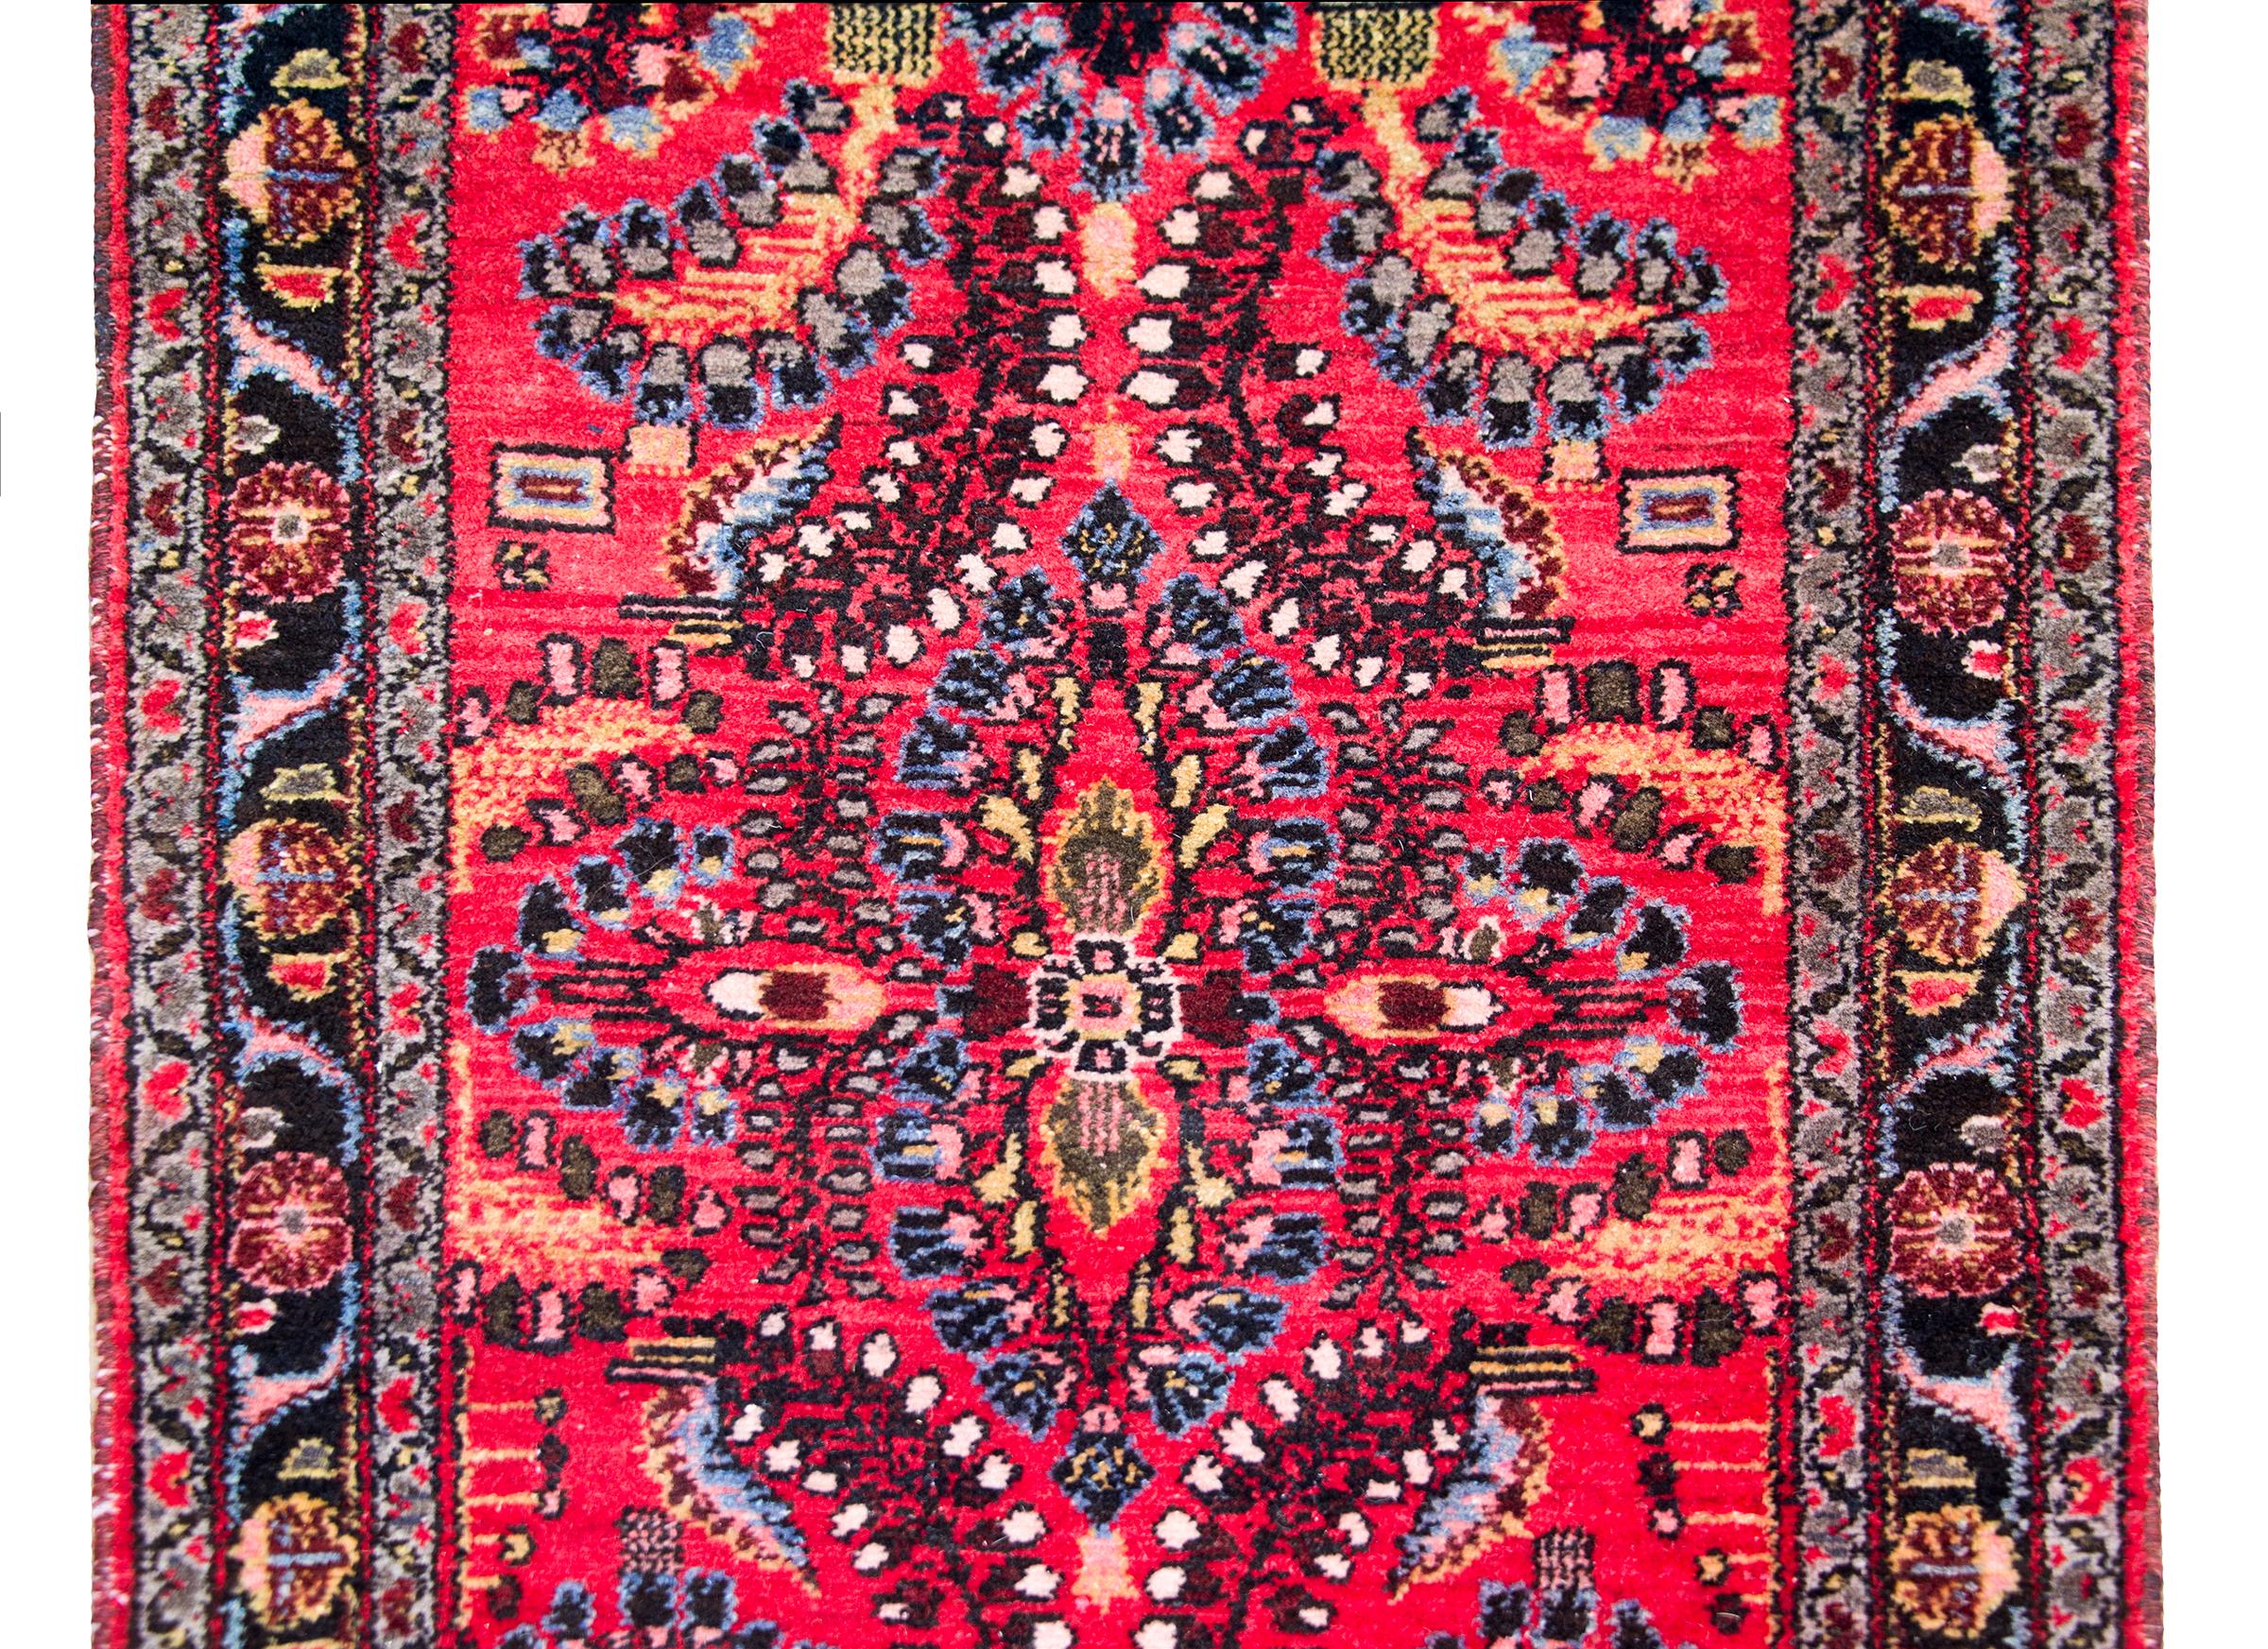 A wonderful early 20th century Persian Dargazin rug with a mirrored floral pattern with myriad floral and leaf clusters covering the field, surrounded by a simple border comprised of three thin petite floral patterned stripes, and all woven in